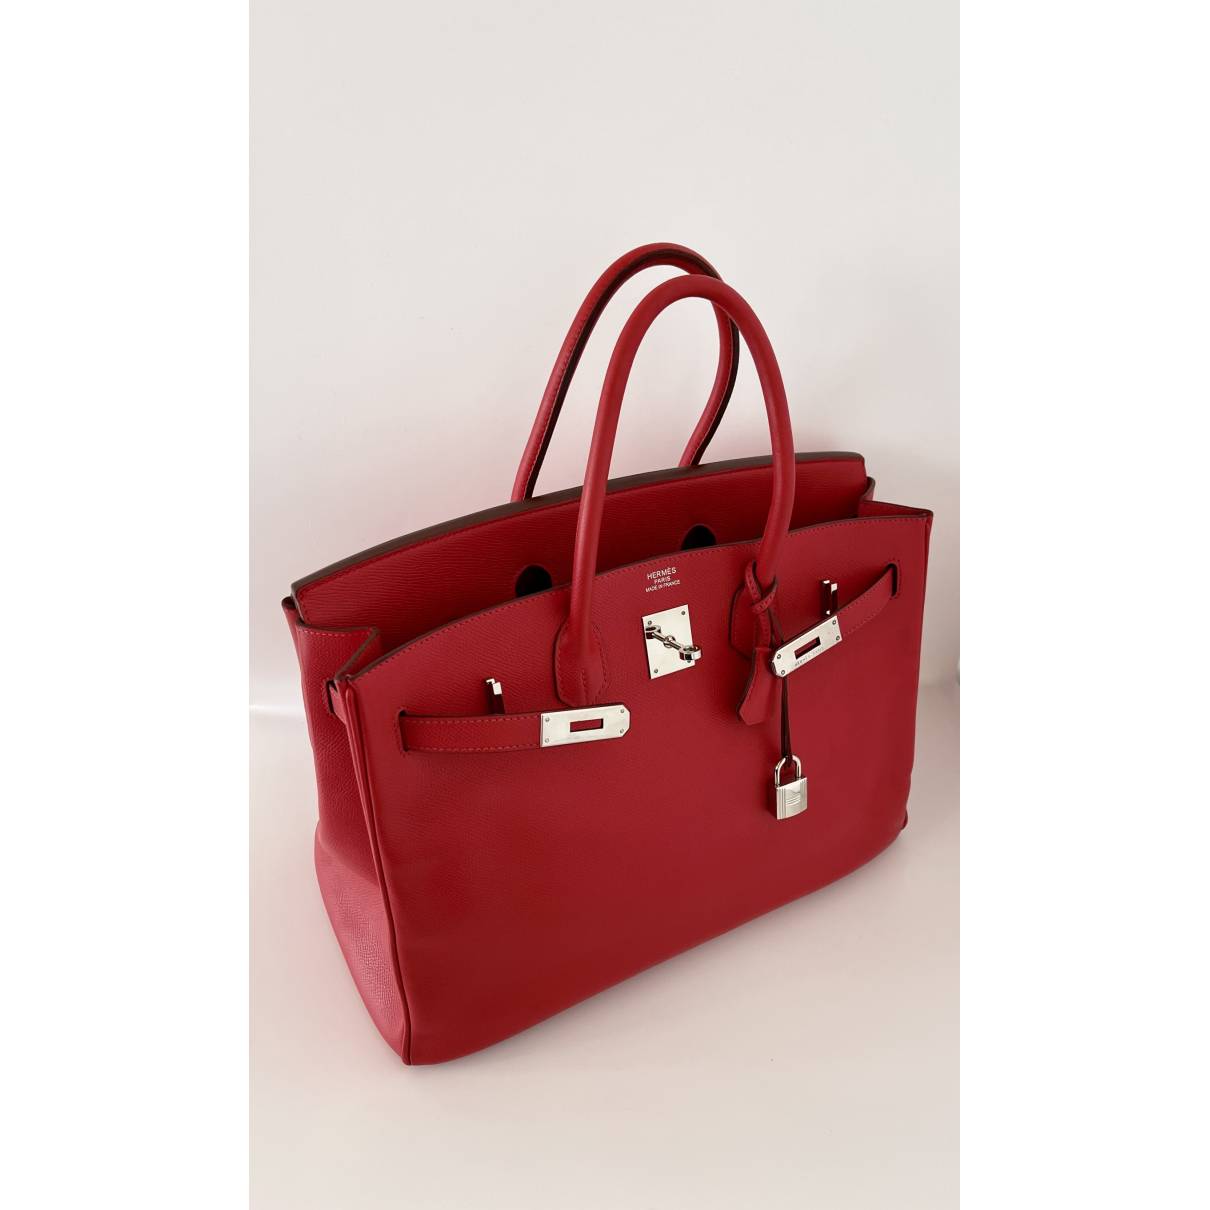 Hermès - Authenticated Birkin 35 Handbag - Leather Red for Women, Very Good Condition